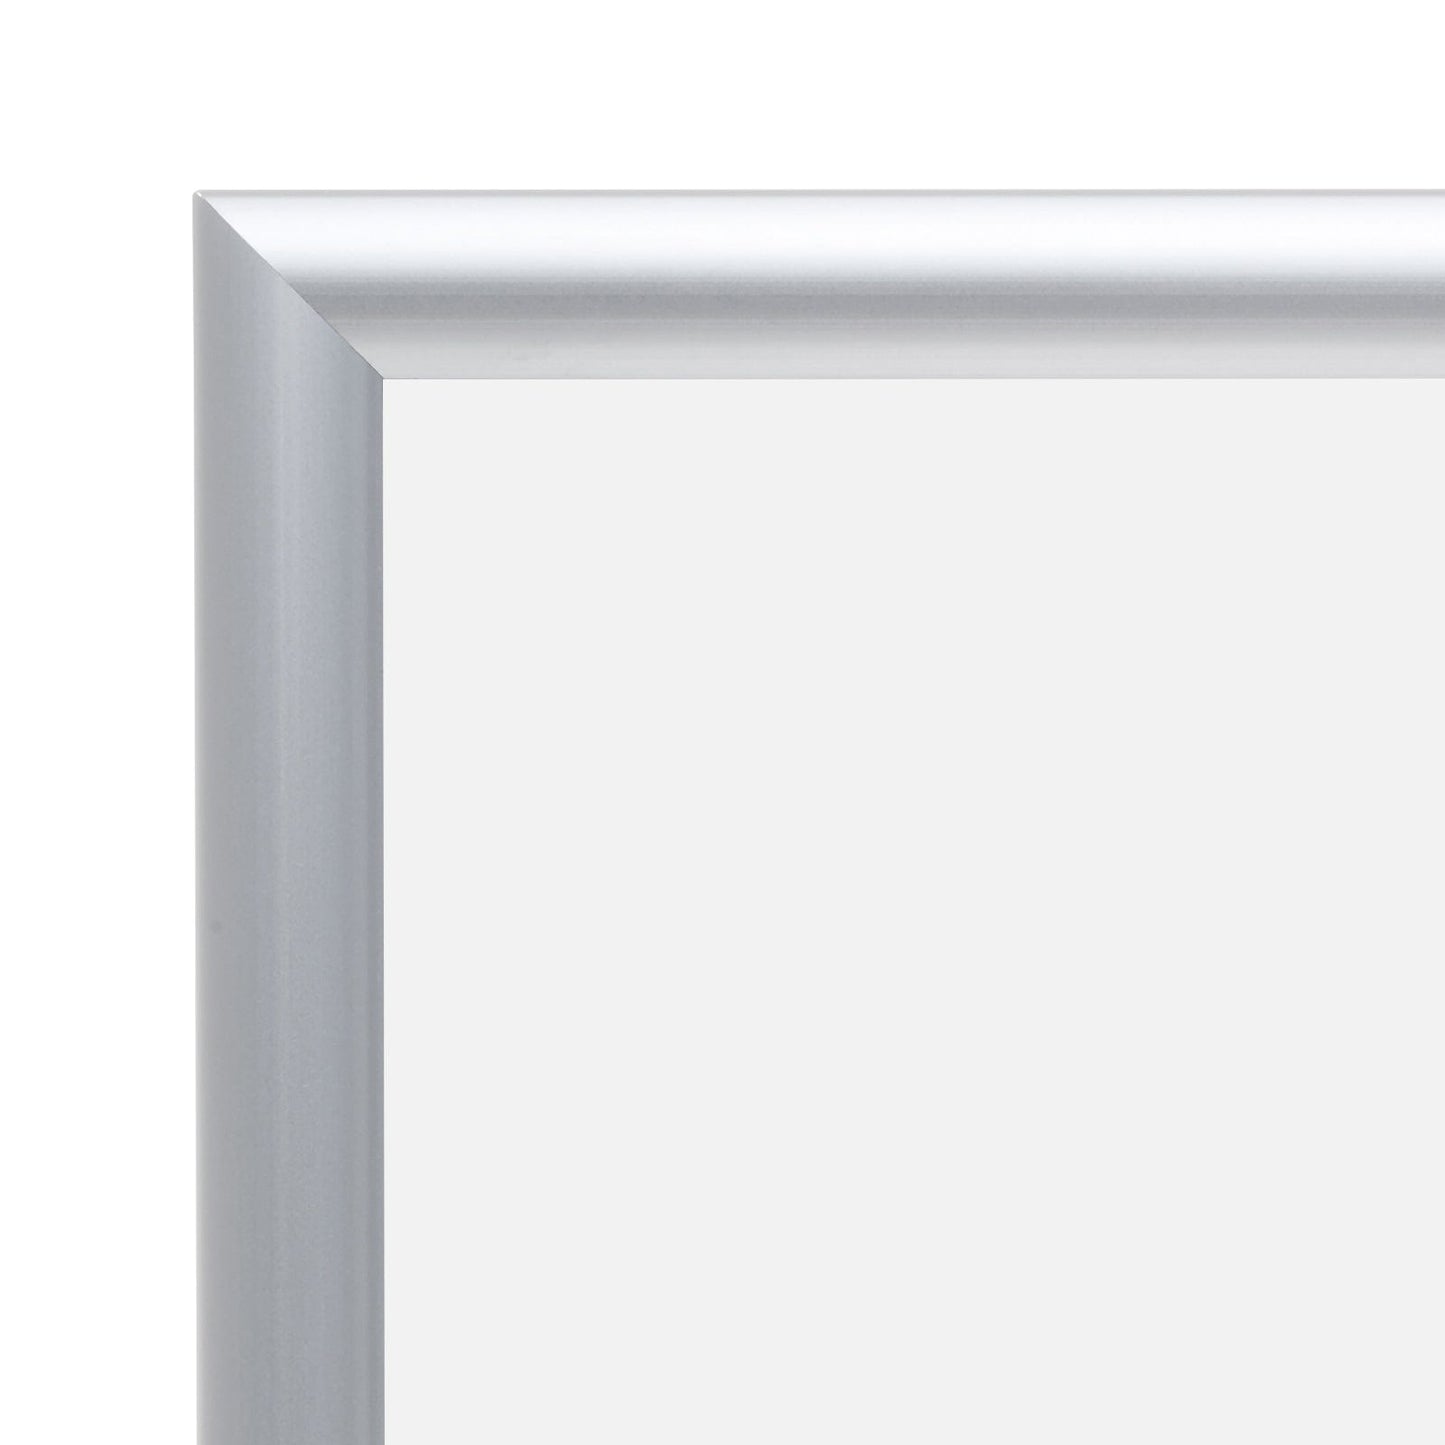 8.5x14 Silver Snap Frame - 1" Profile - Snap Frames Direct